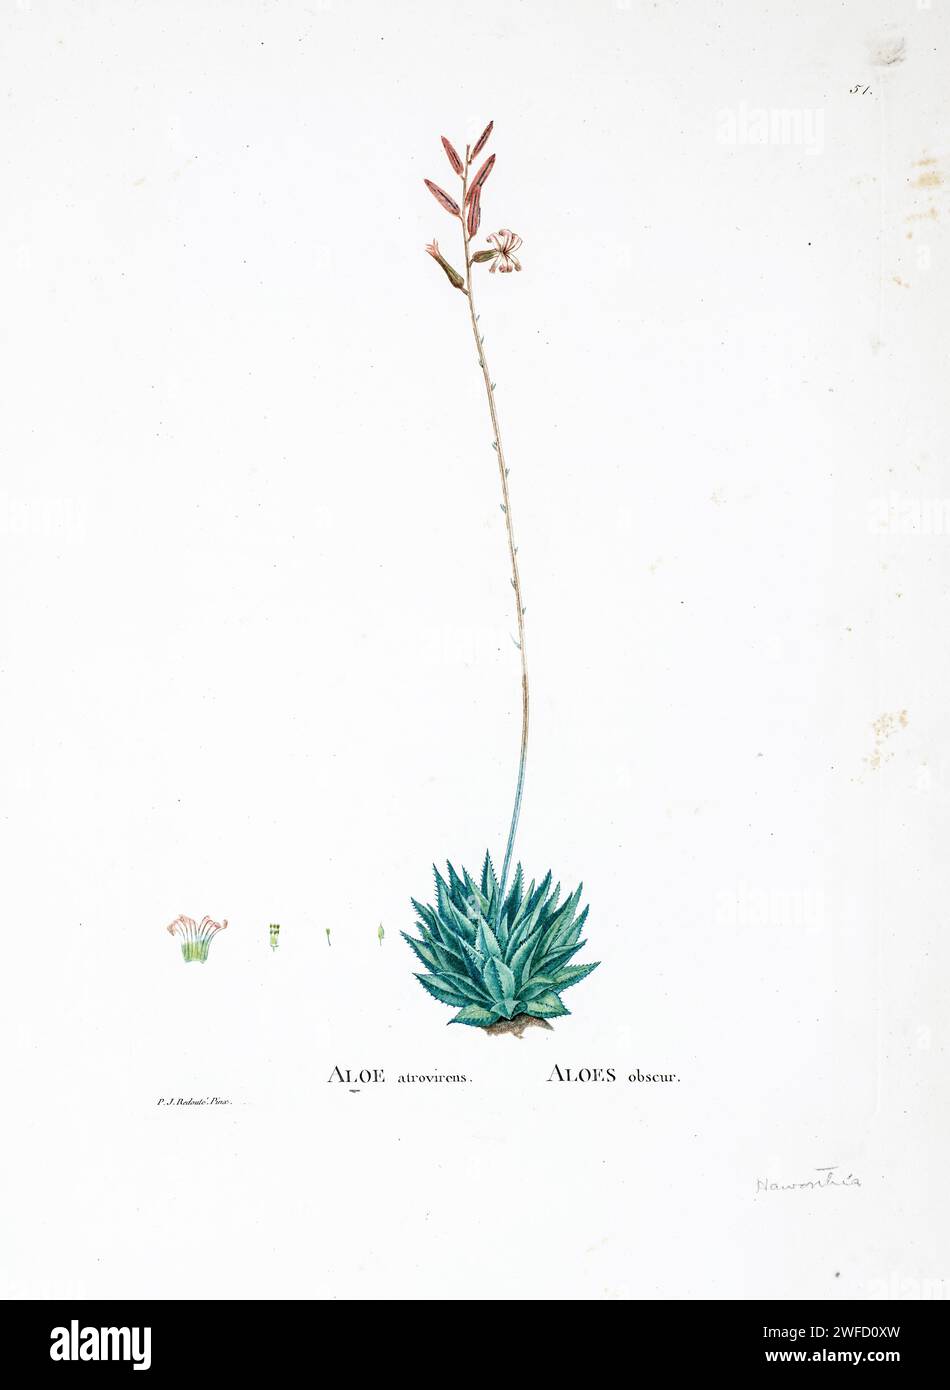 Haworthia herbacea Here As Aloe atrovirens from History of Succulent Plants [Plantarum historia succulentarum / Histoire des plantes grasses] painted by Pierre-Joseph Redouté and described by Augustin Pyramus de Candolle 1799 Haworthia is a large genus of small succulent plants endemic to Southern Africa. Like the aloes, they are members of the subfamily Asphodeloideae and they generally resemble miniature aloes, except in their flowers, which are distinctive in appearance. They are popular garden and container plants. Stock Photo